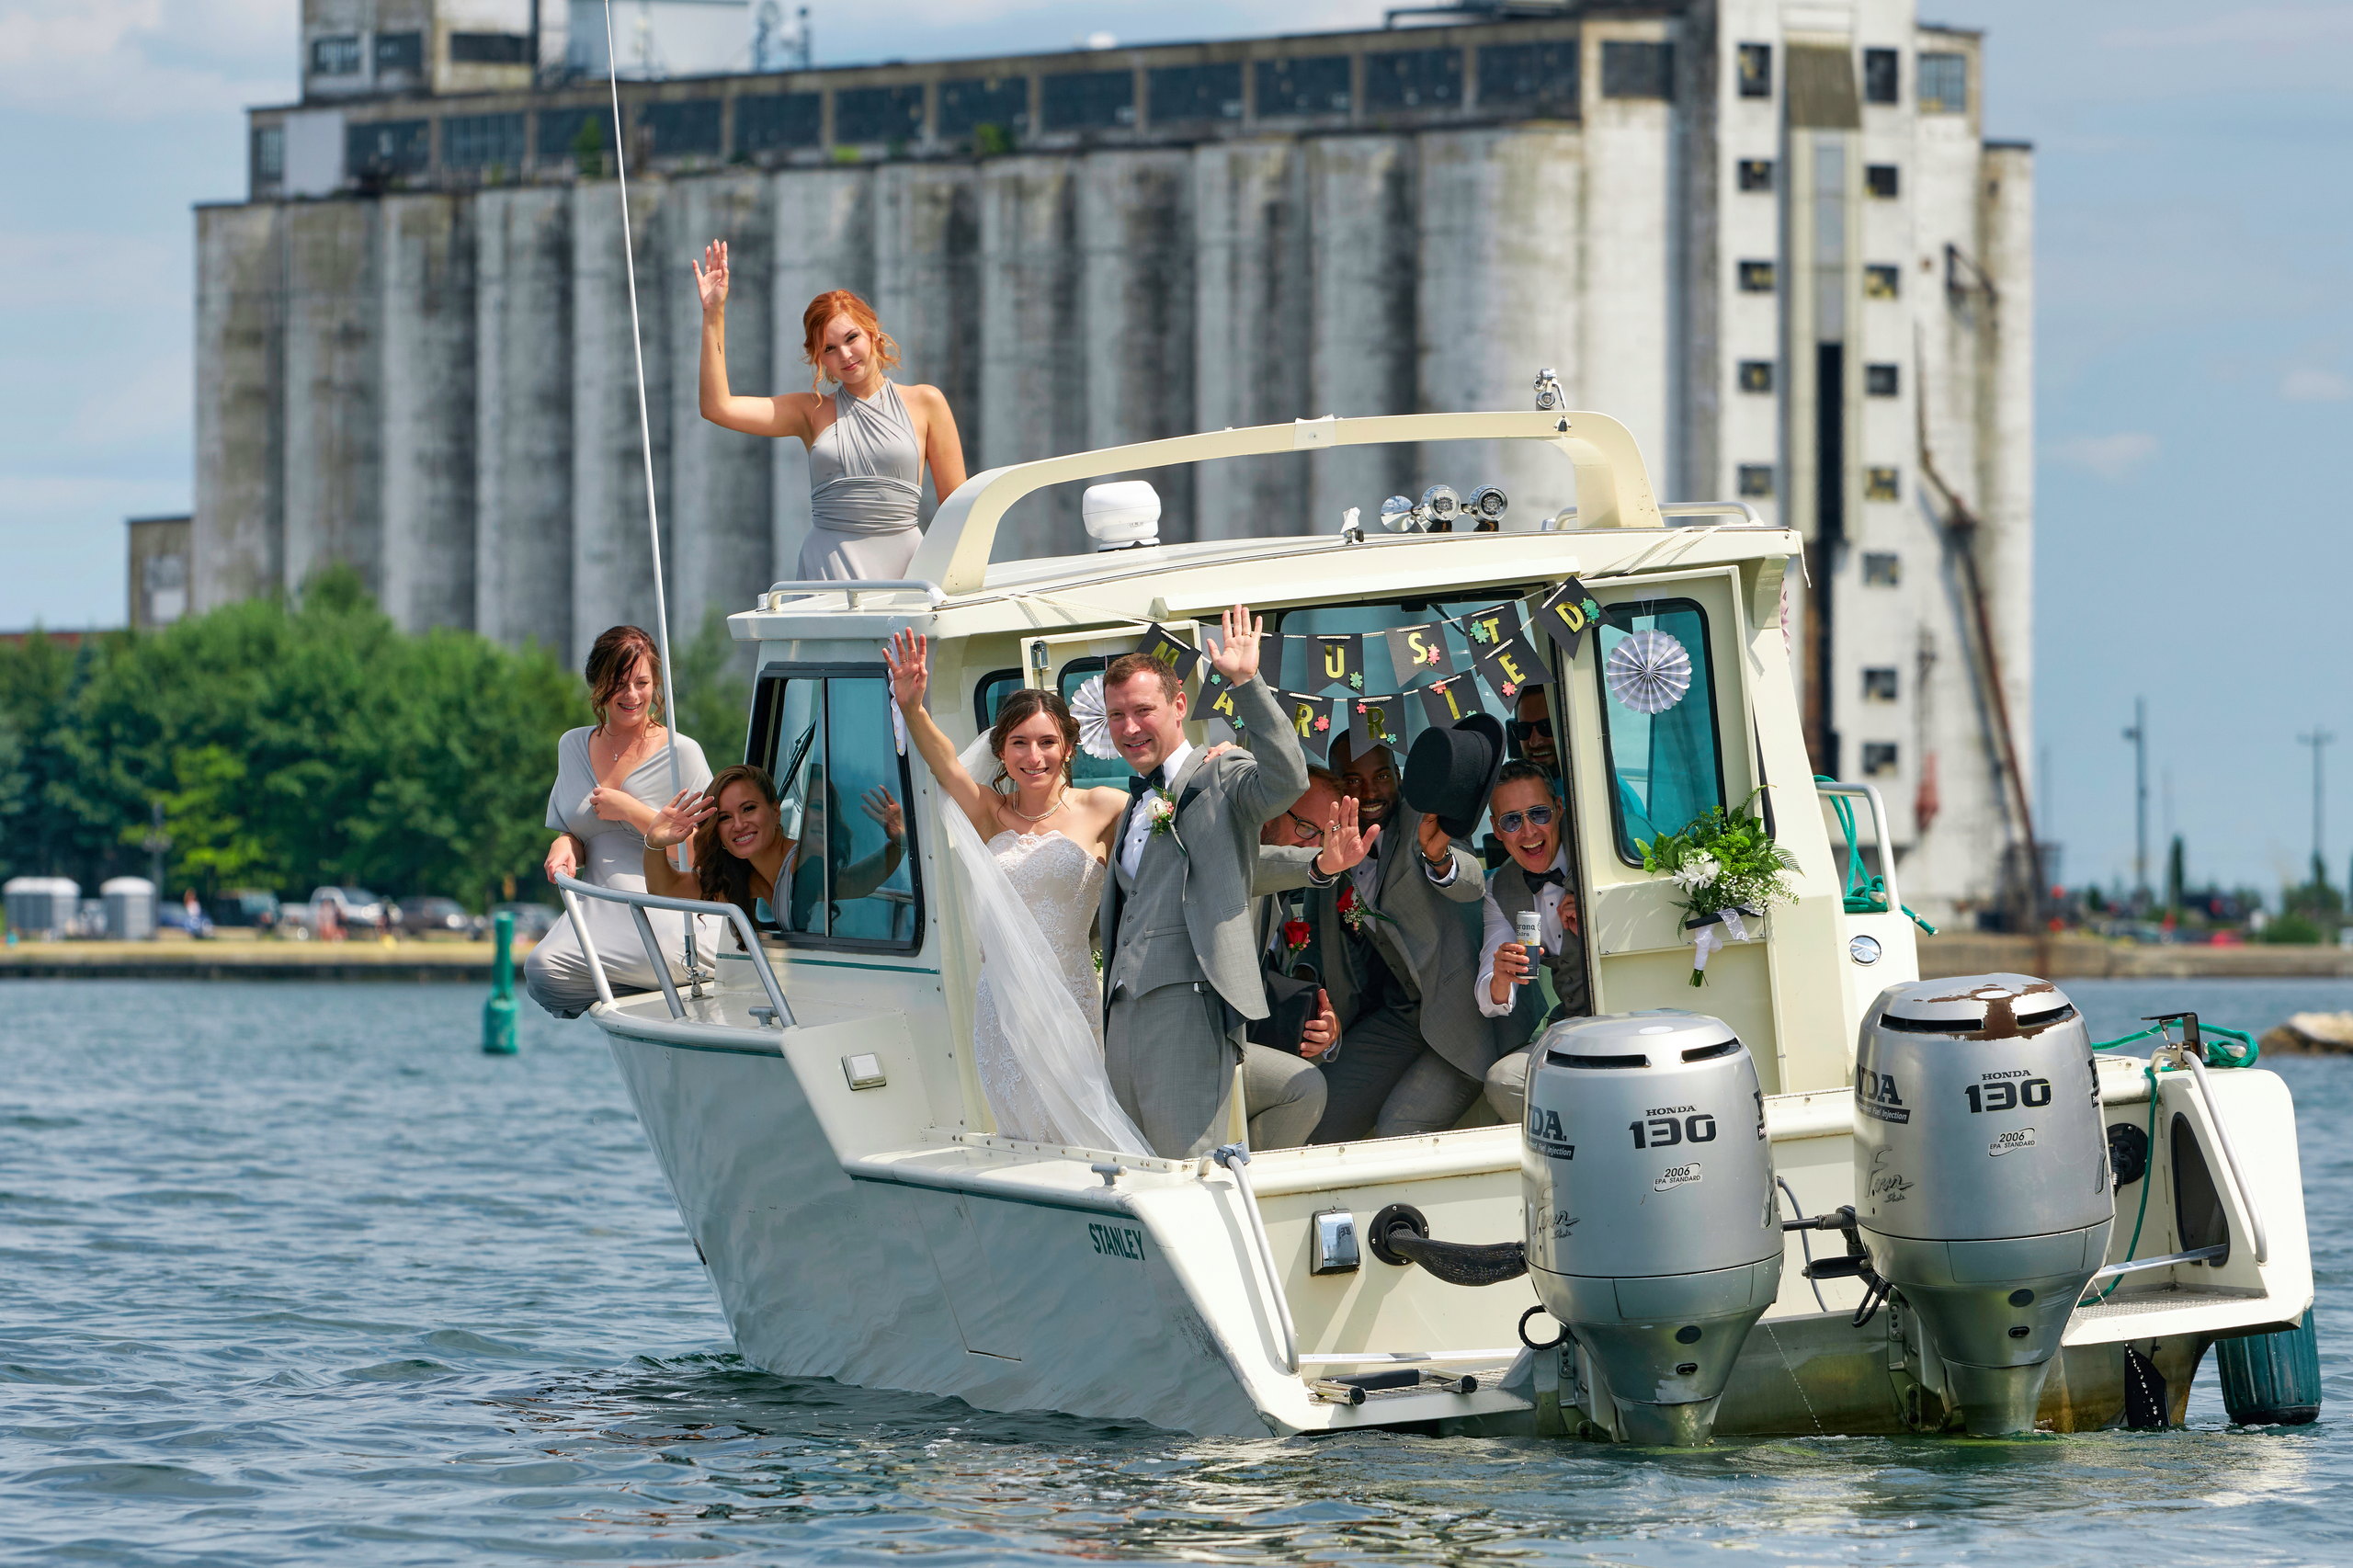 Wedding Party from Bear Estate in Collingwood Takes Motorboat into Harbour